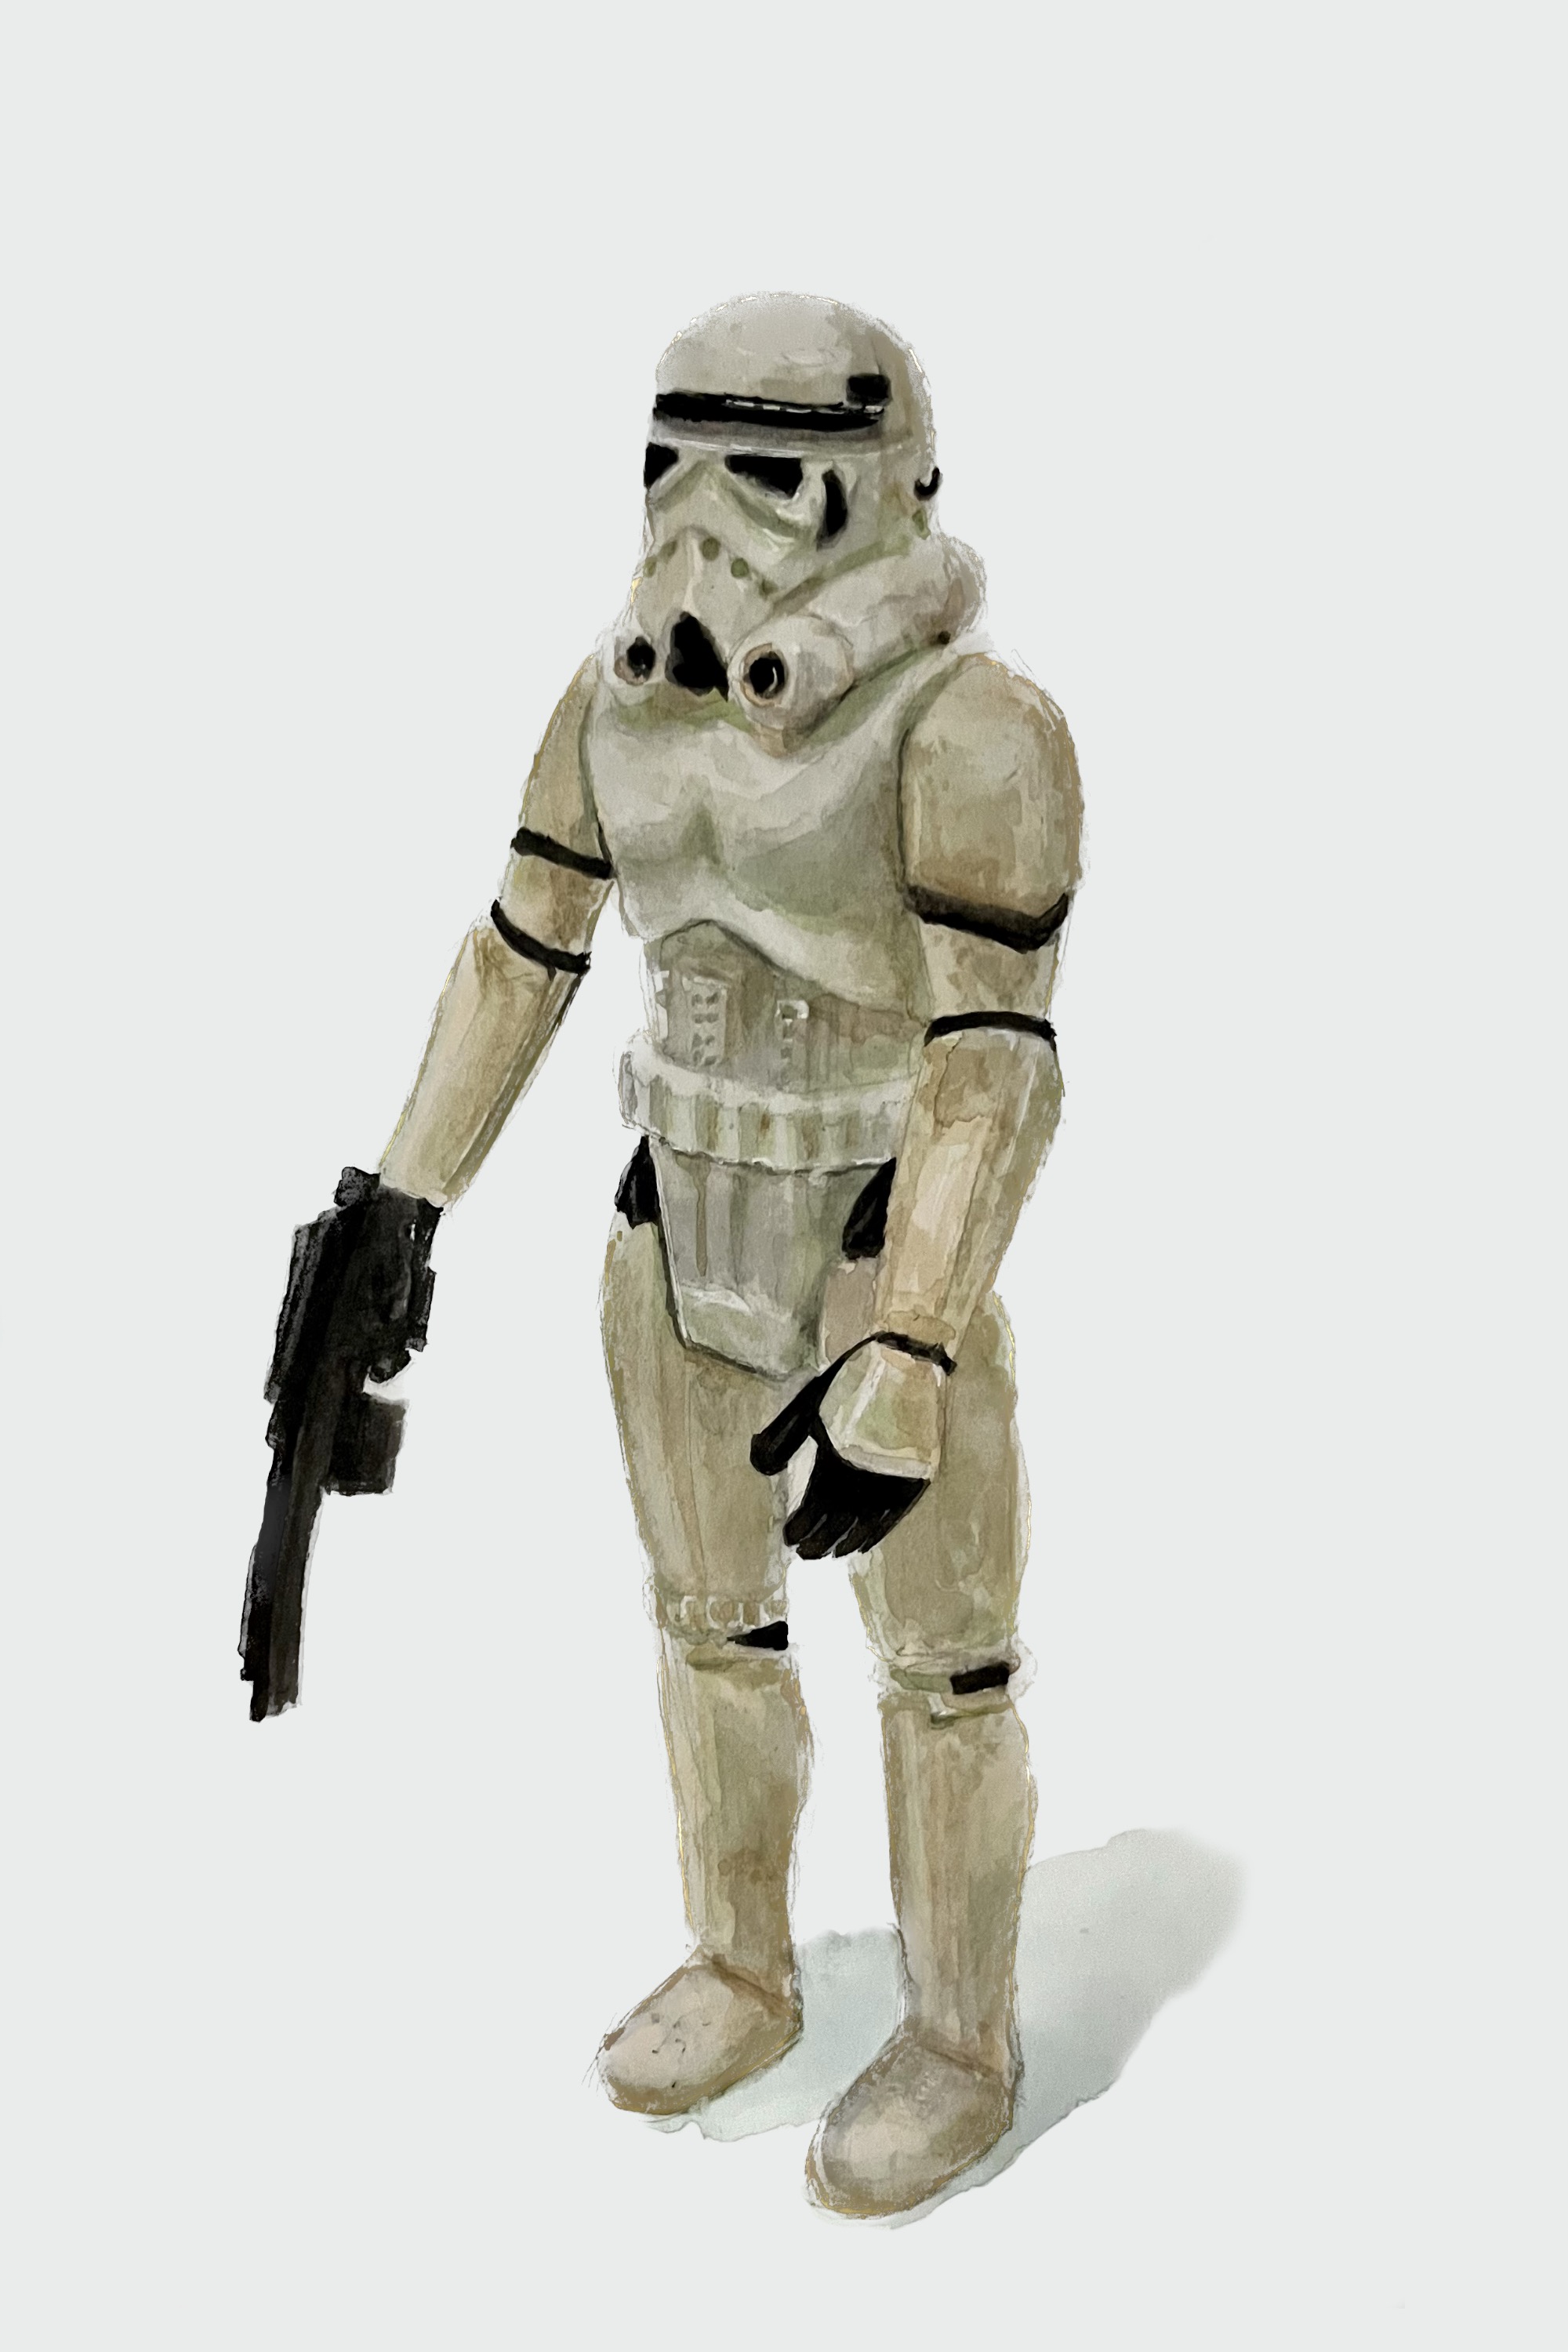 #32 The 1977 Stormtrooper